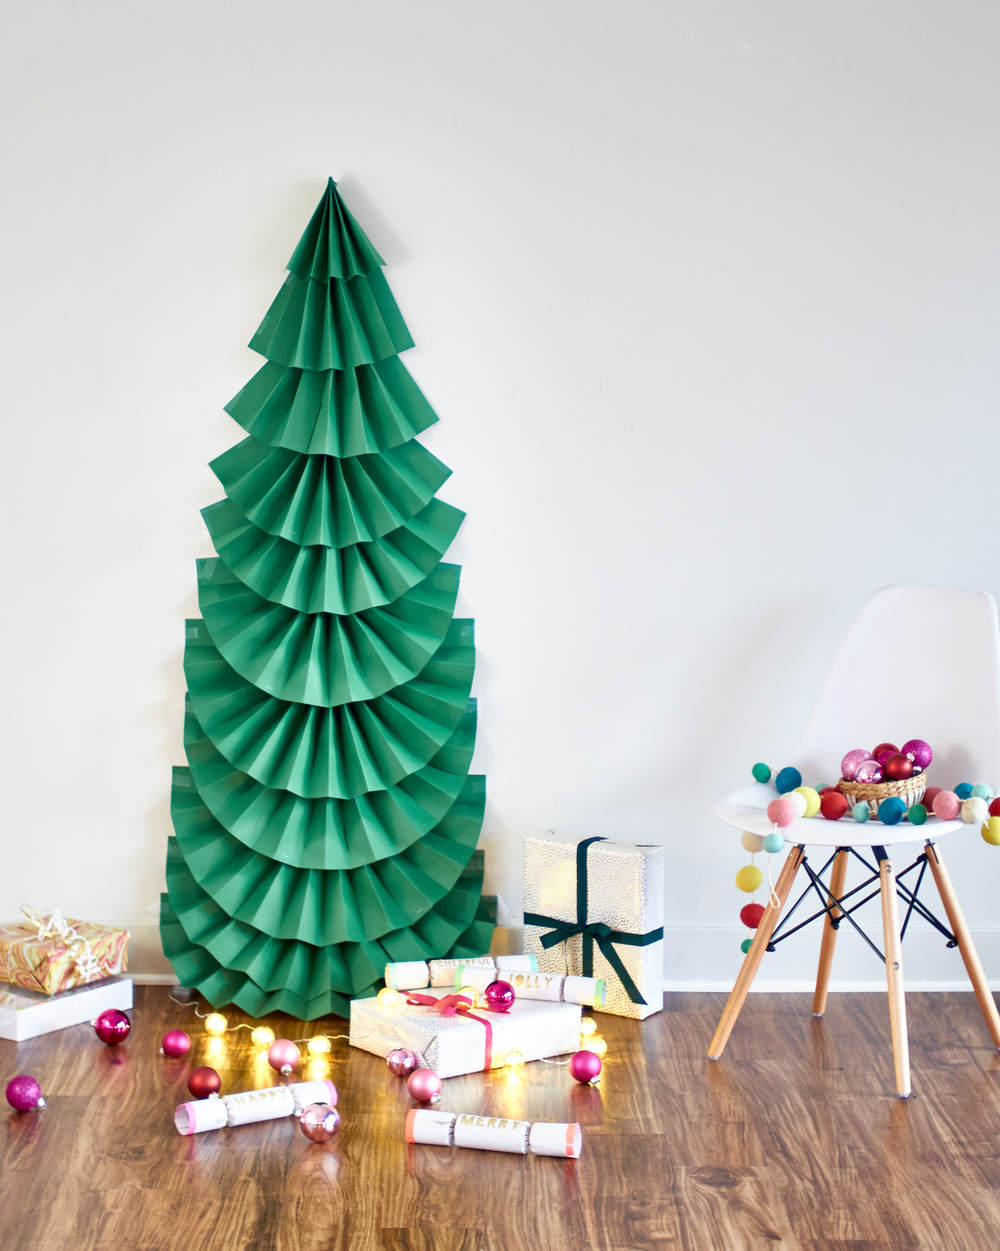 Make this sweet and simple DIY folded paper Christmas tree!